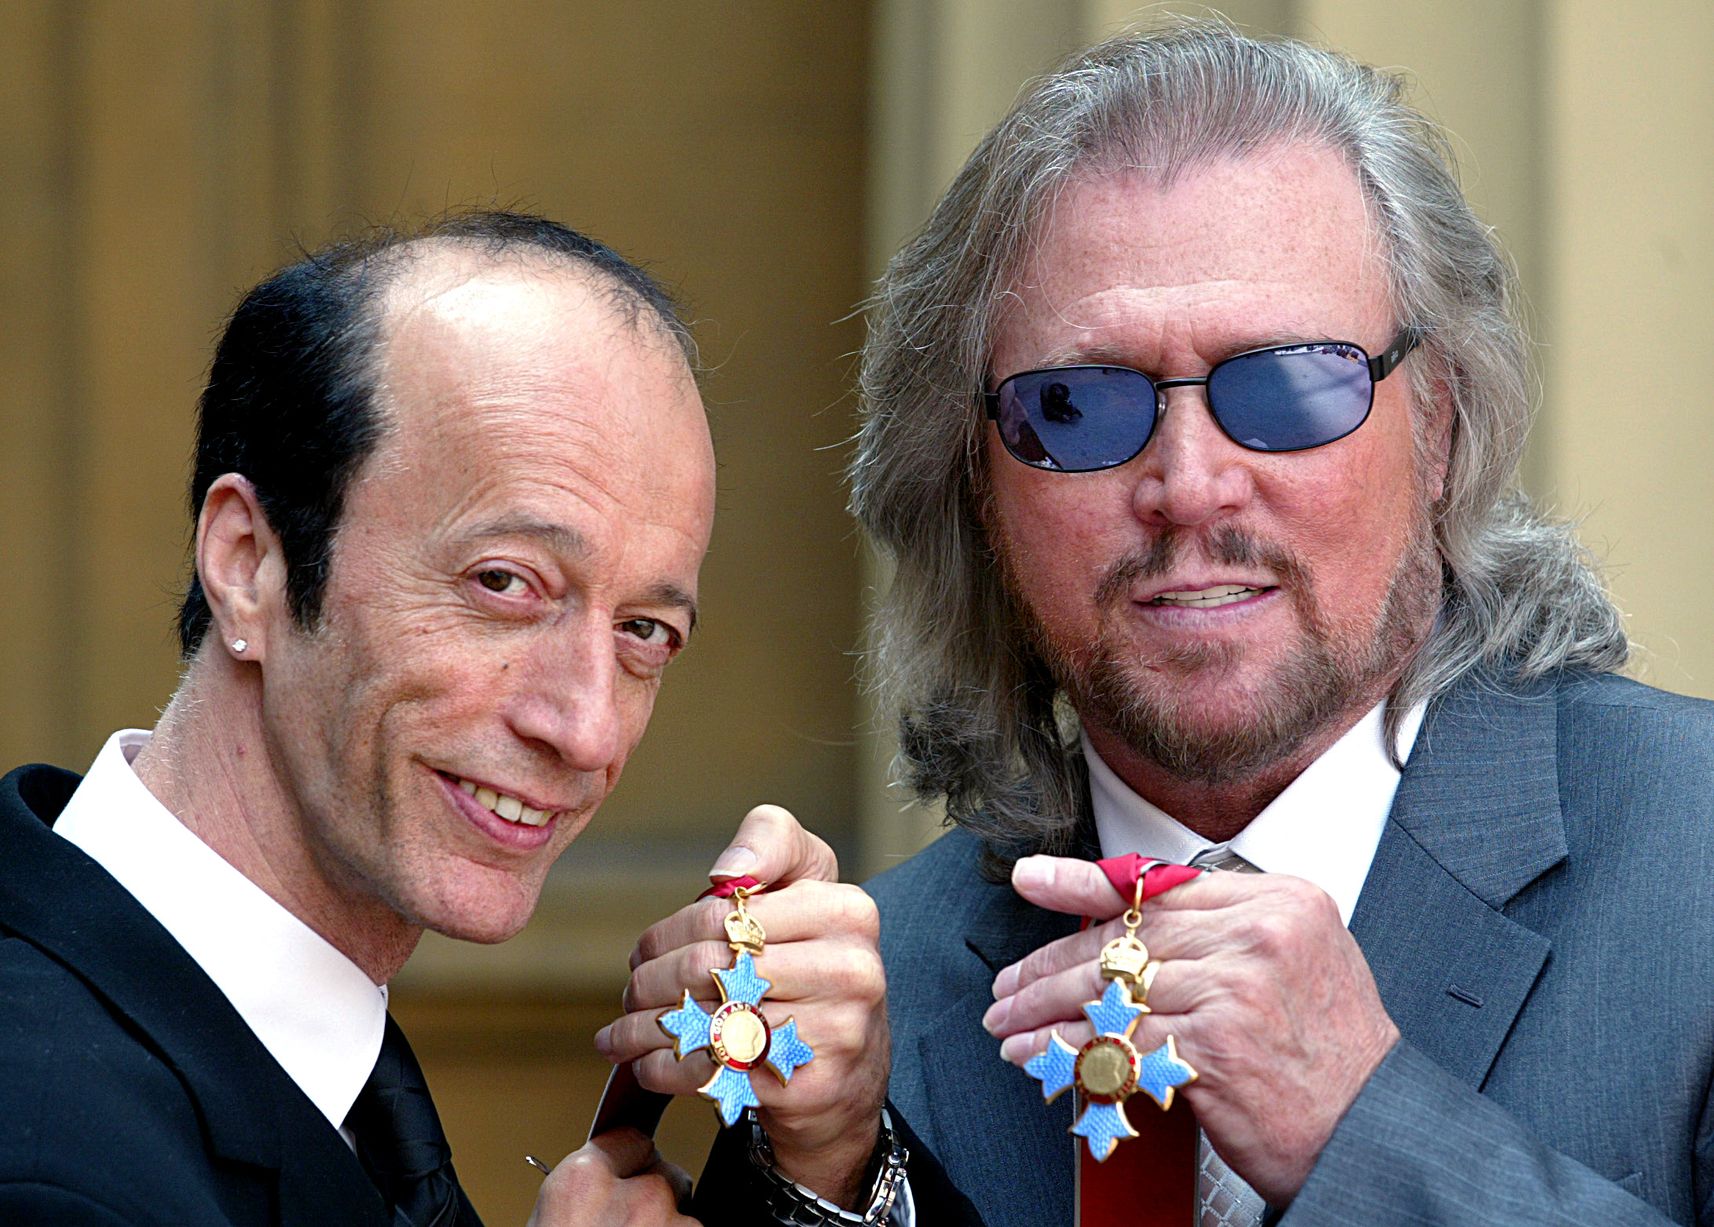 Bee Gees Barry Gibb 2019 - HD Wallpaper 